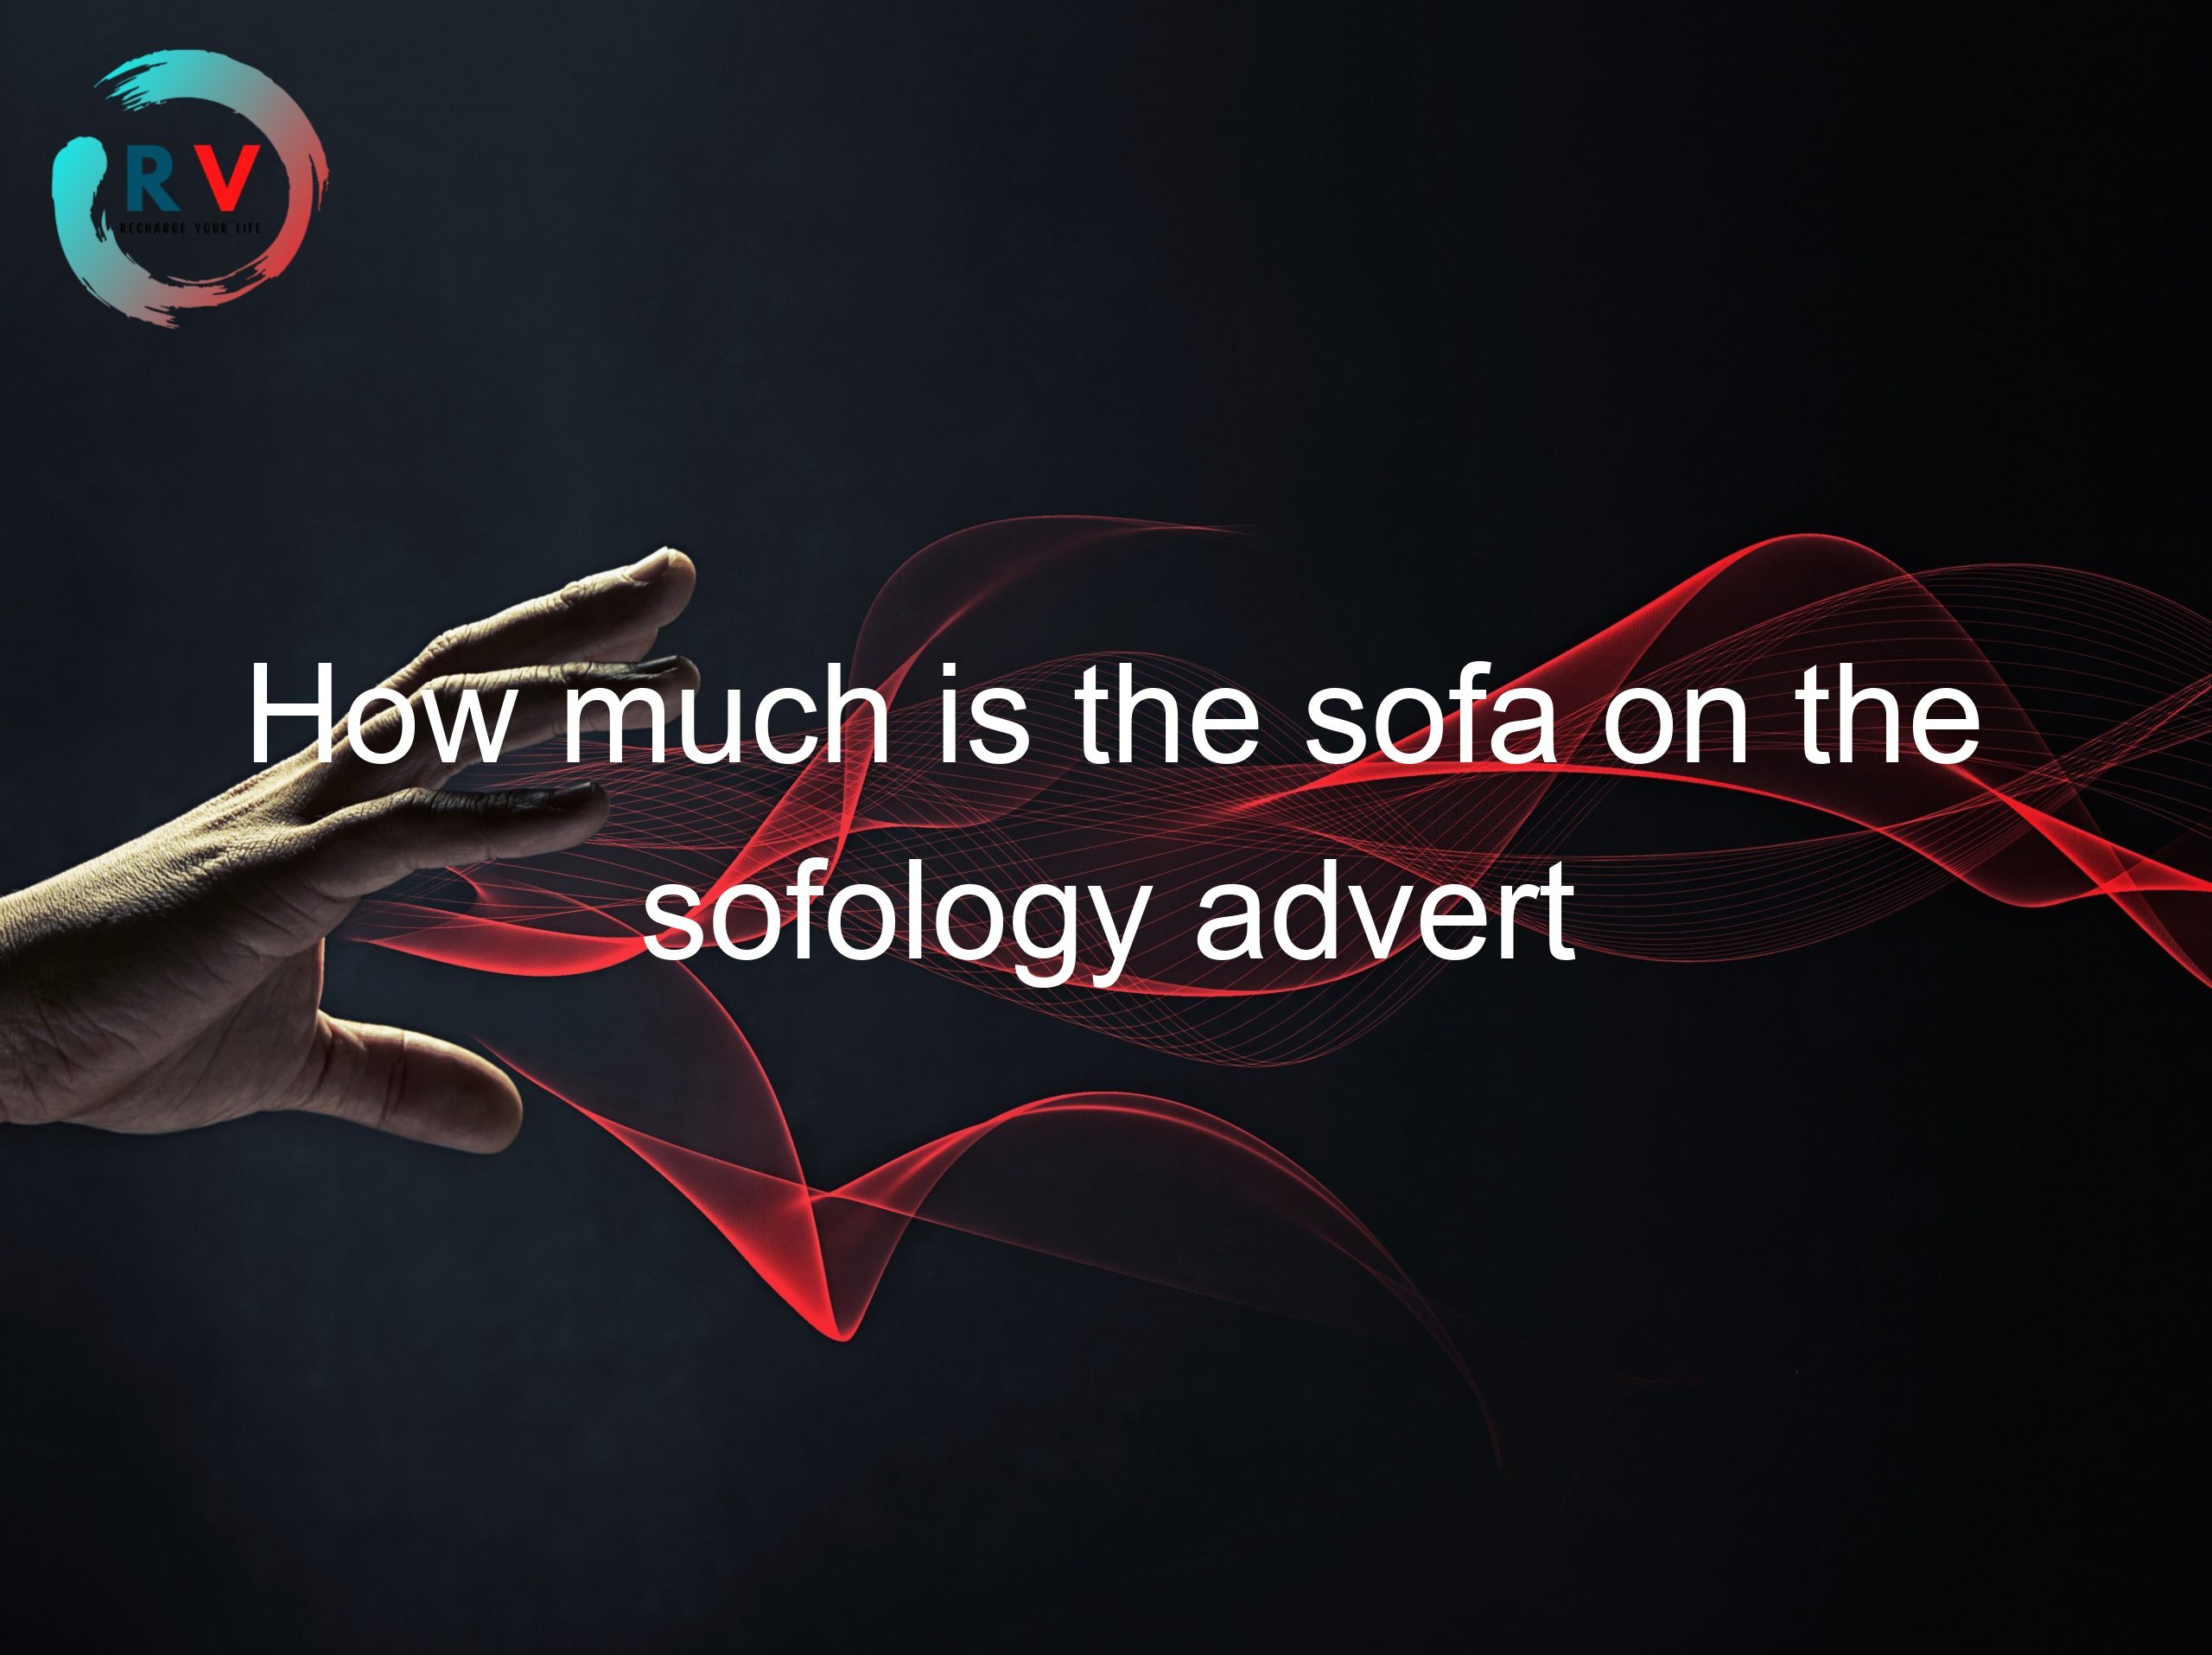 How much is the sofa on the sofology advert